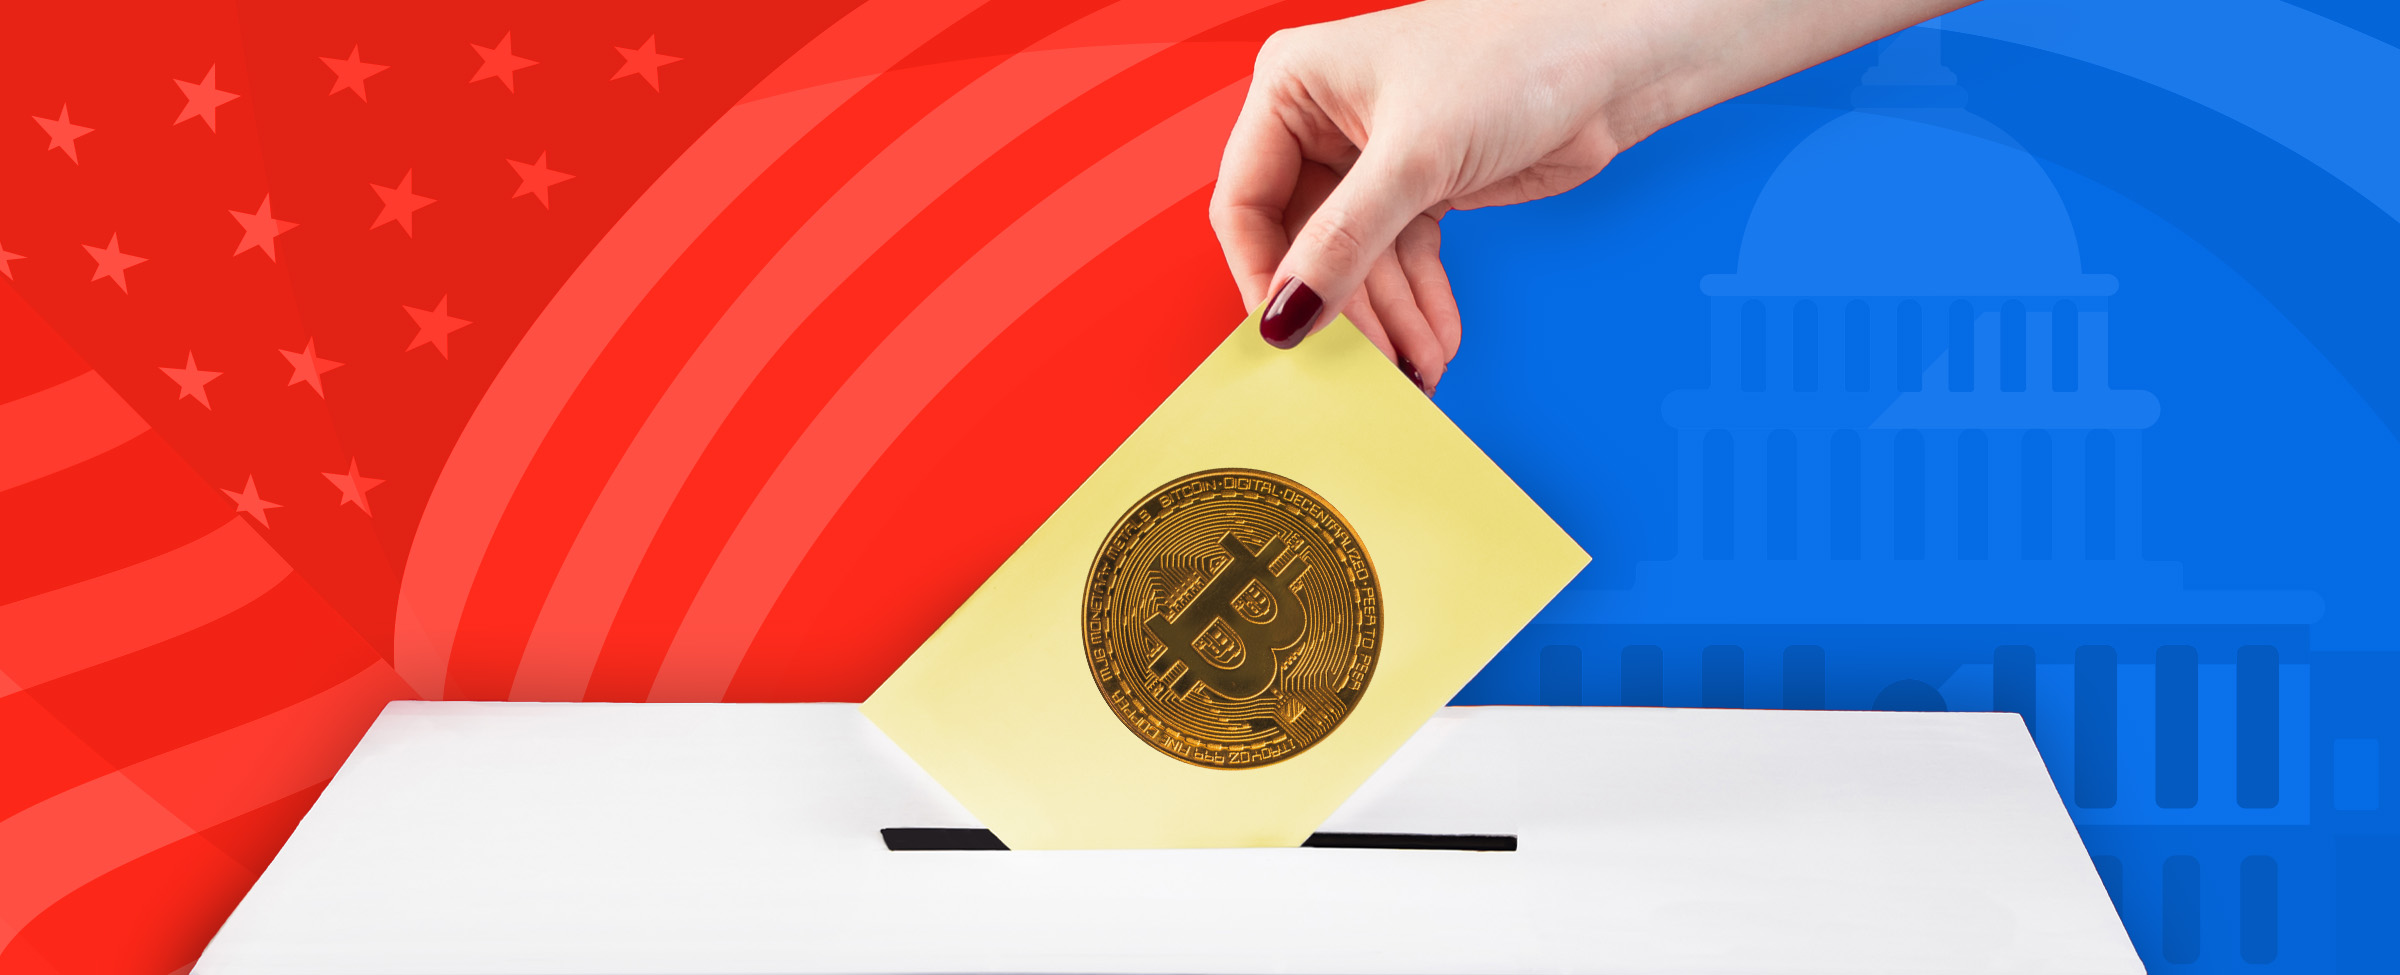 An illustration of a ballot box with a voter’s hand placing a piece of paper in the slot containing a Bitcoin stamp on it, while the background is on red on the left side showing a faded American flag, and blue on the right showing a faded Capitol Hill illustration